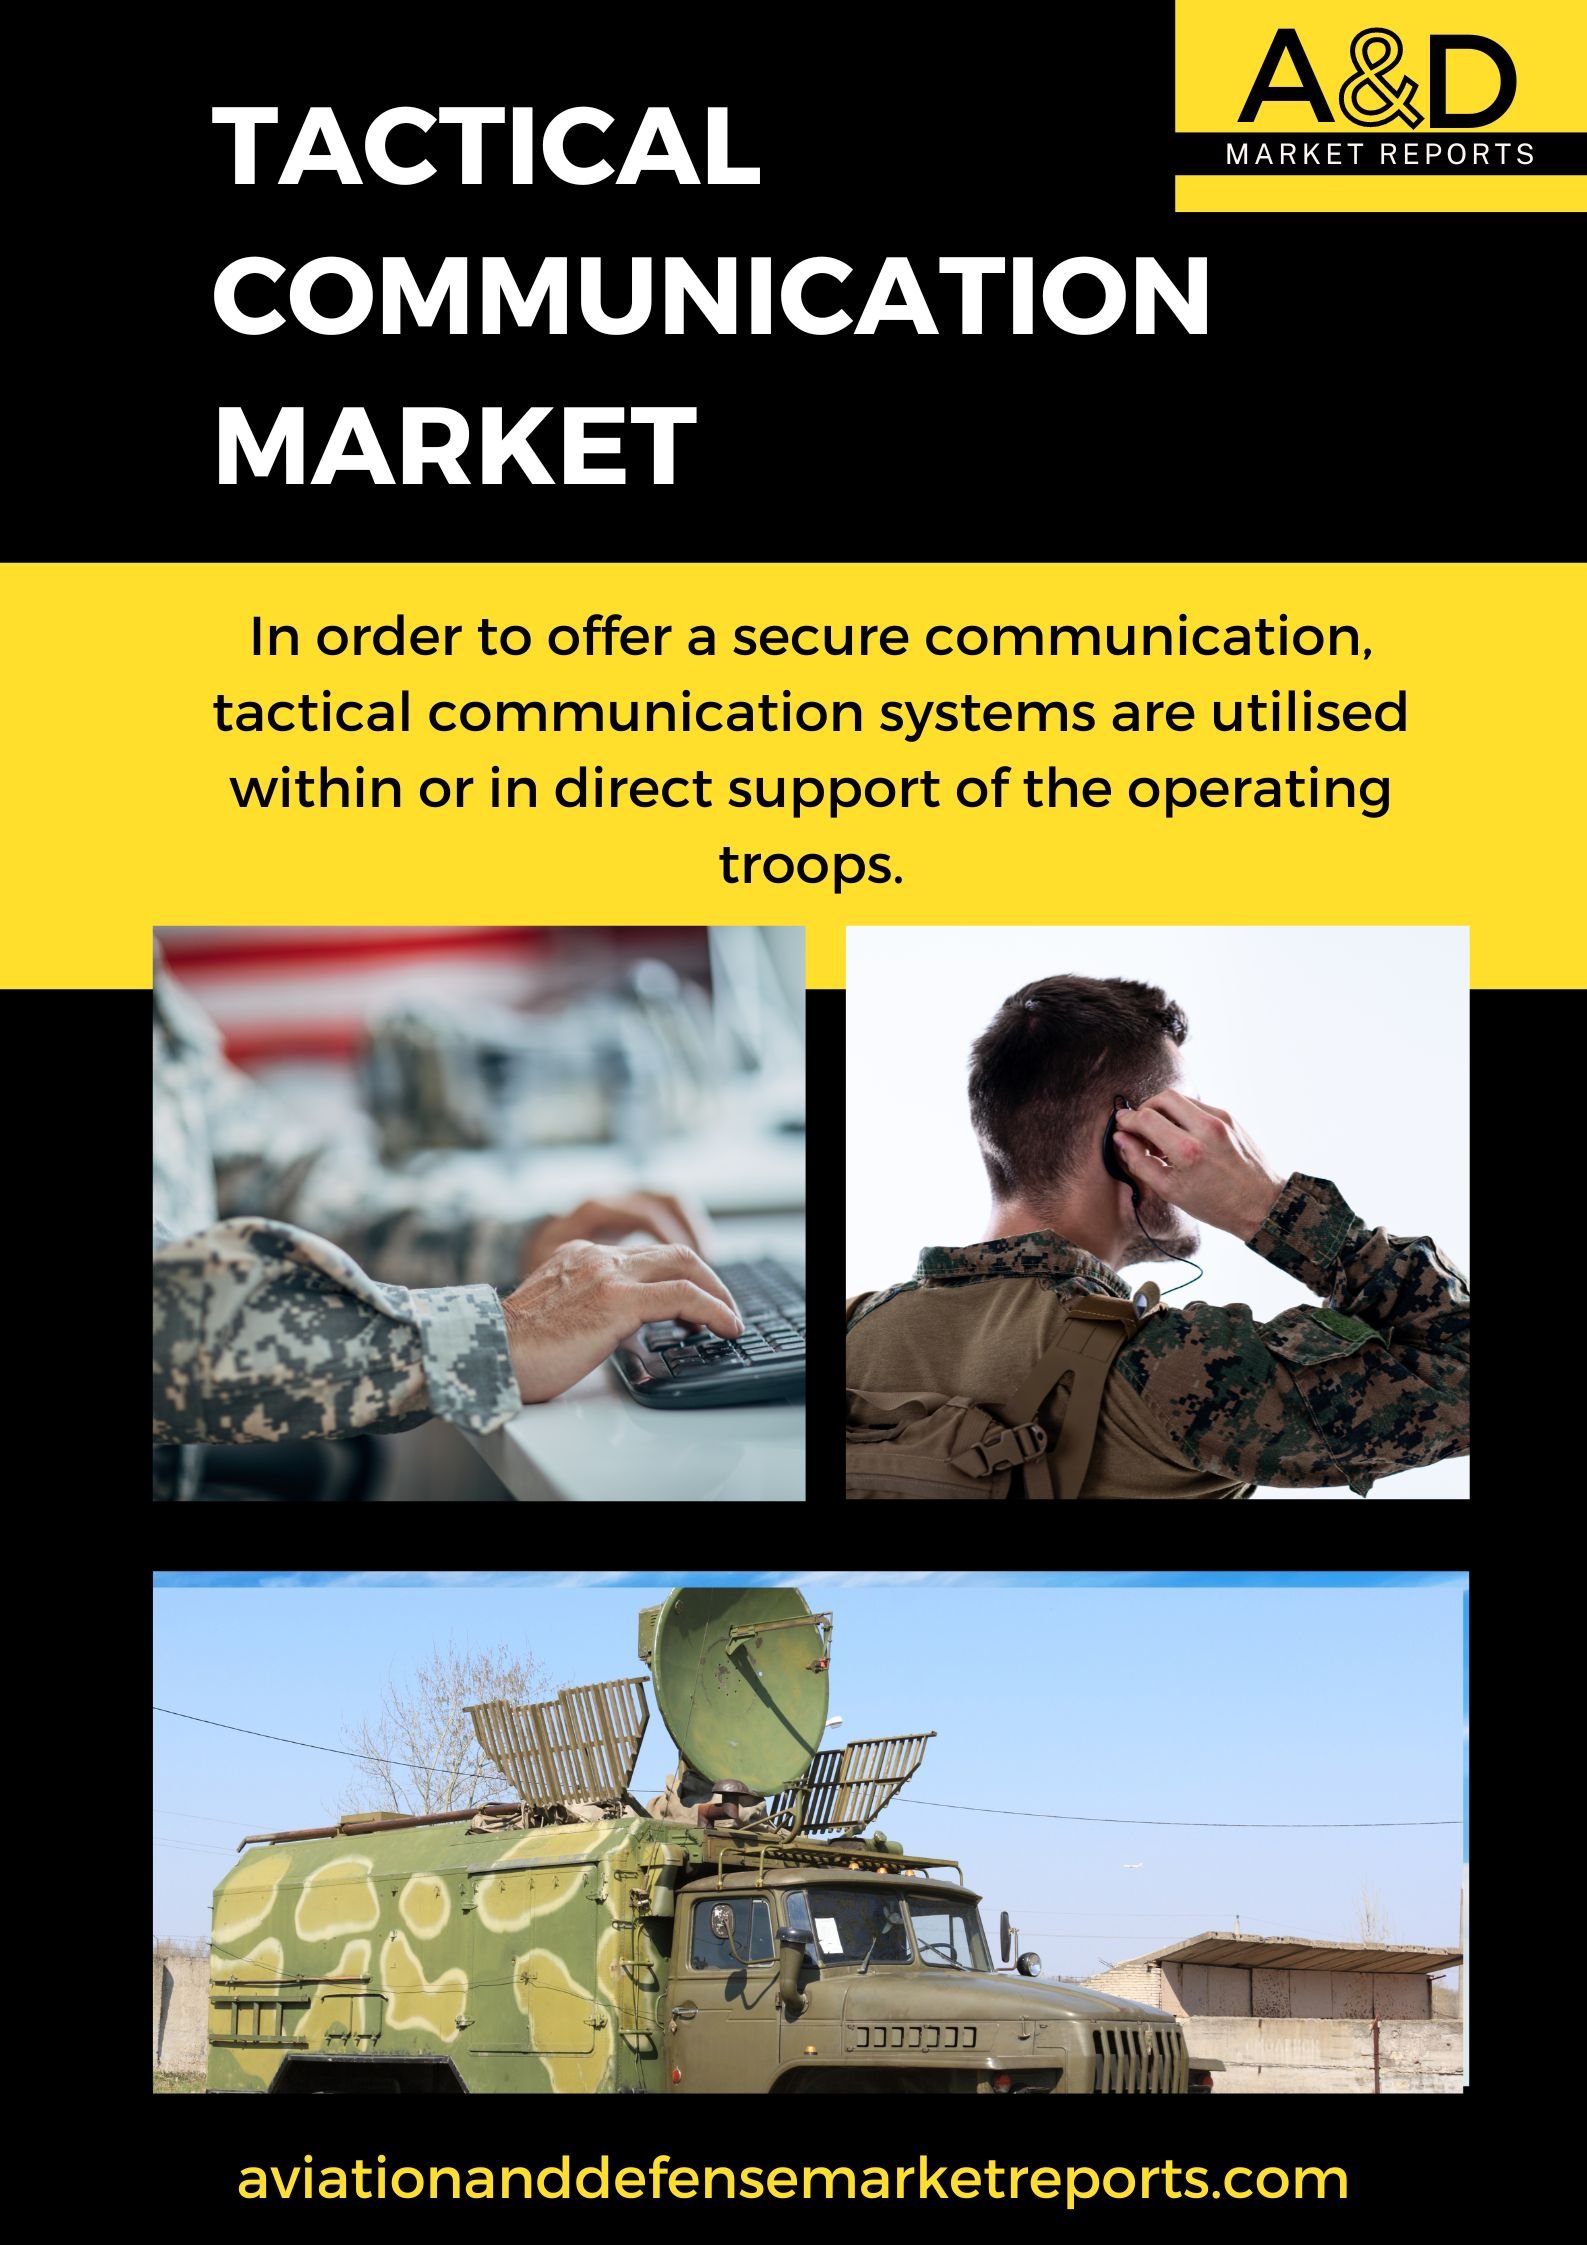 Increasing Demand for Bandwidth Is A Challenge For Military Tactical Communication Systems